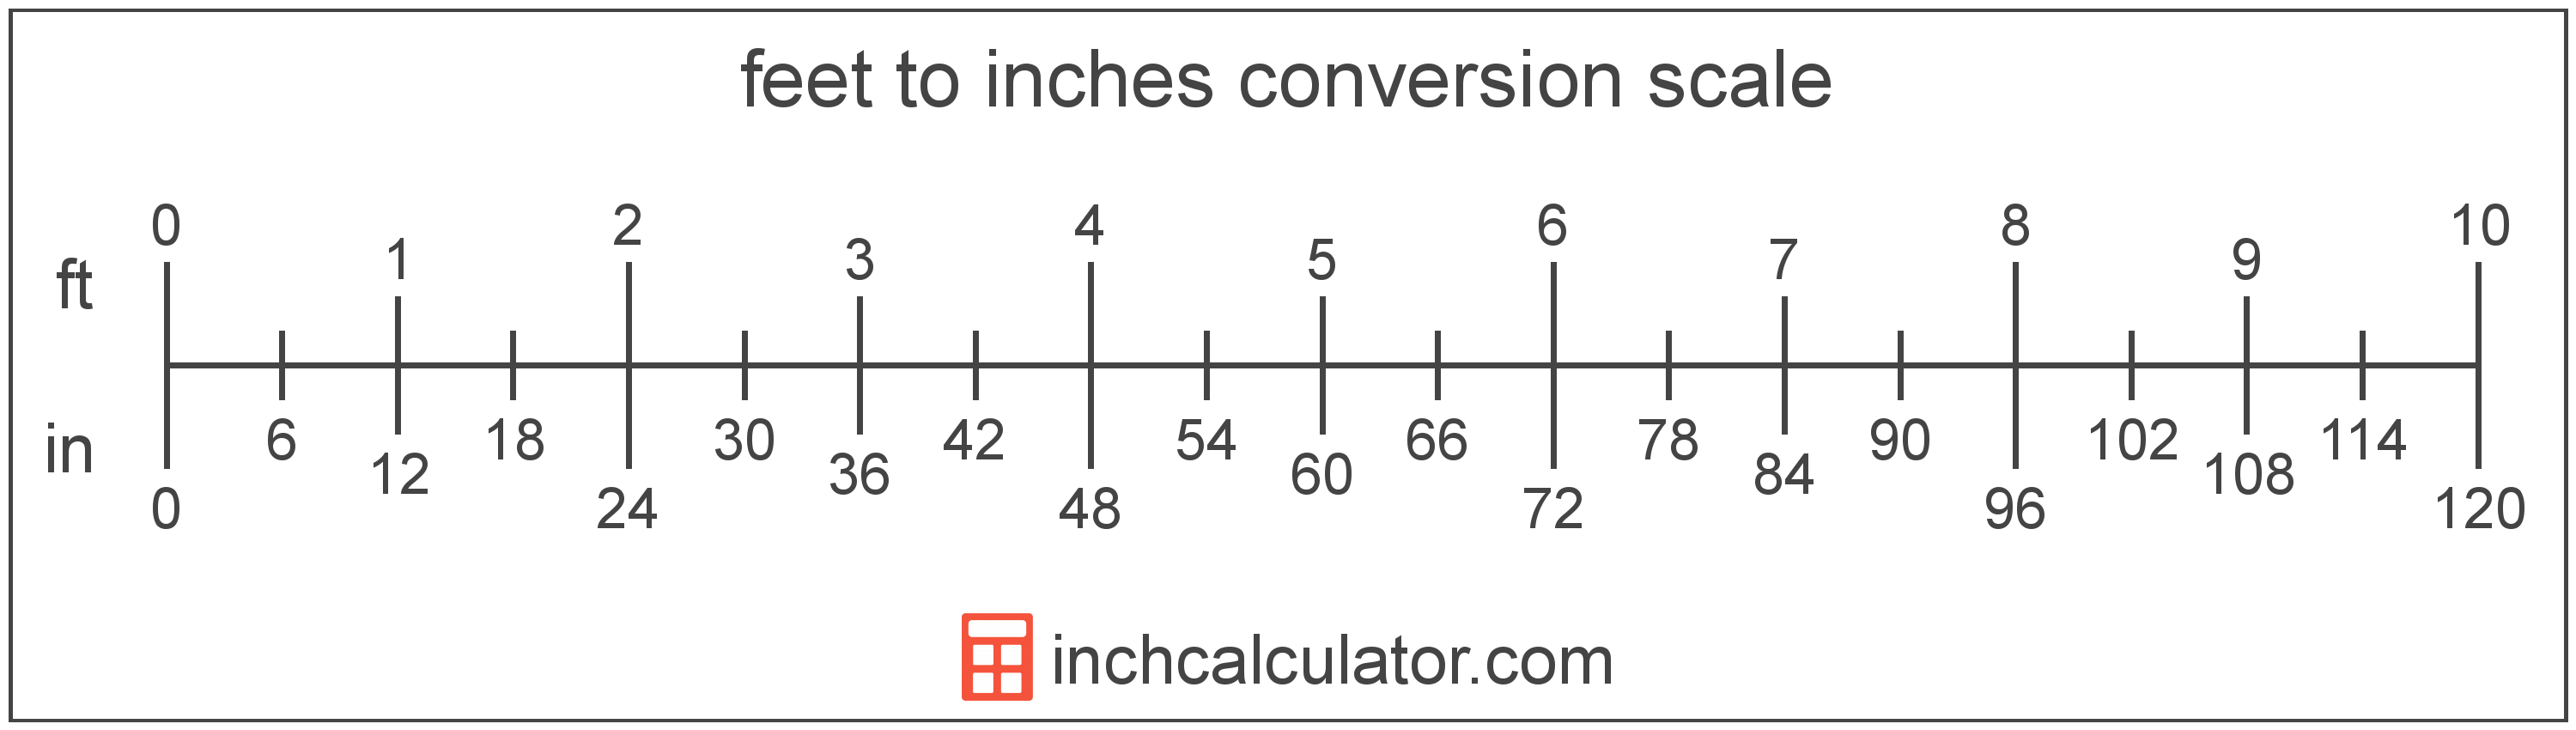 conversion scale showing inches and equivalent feet length values